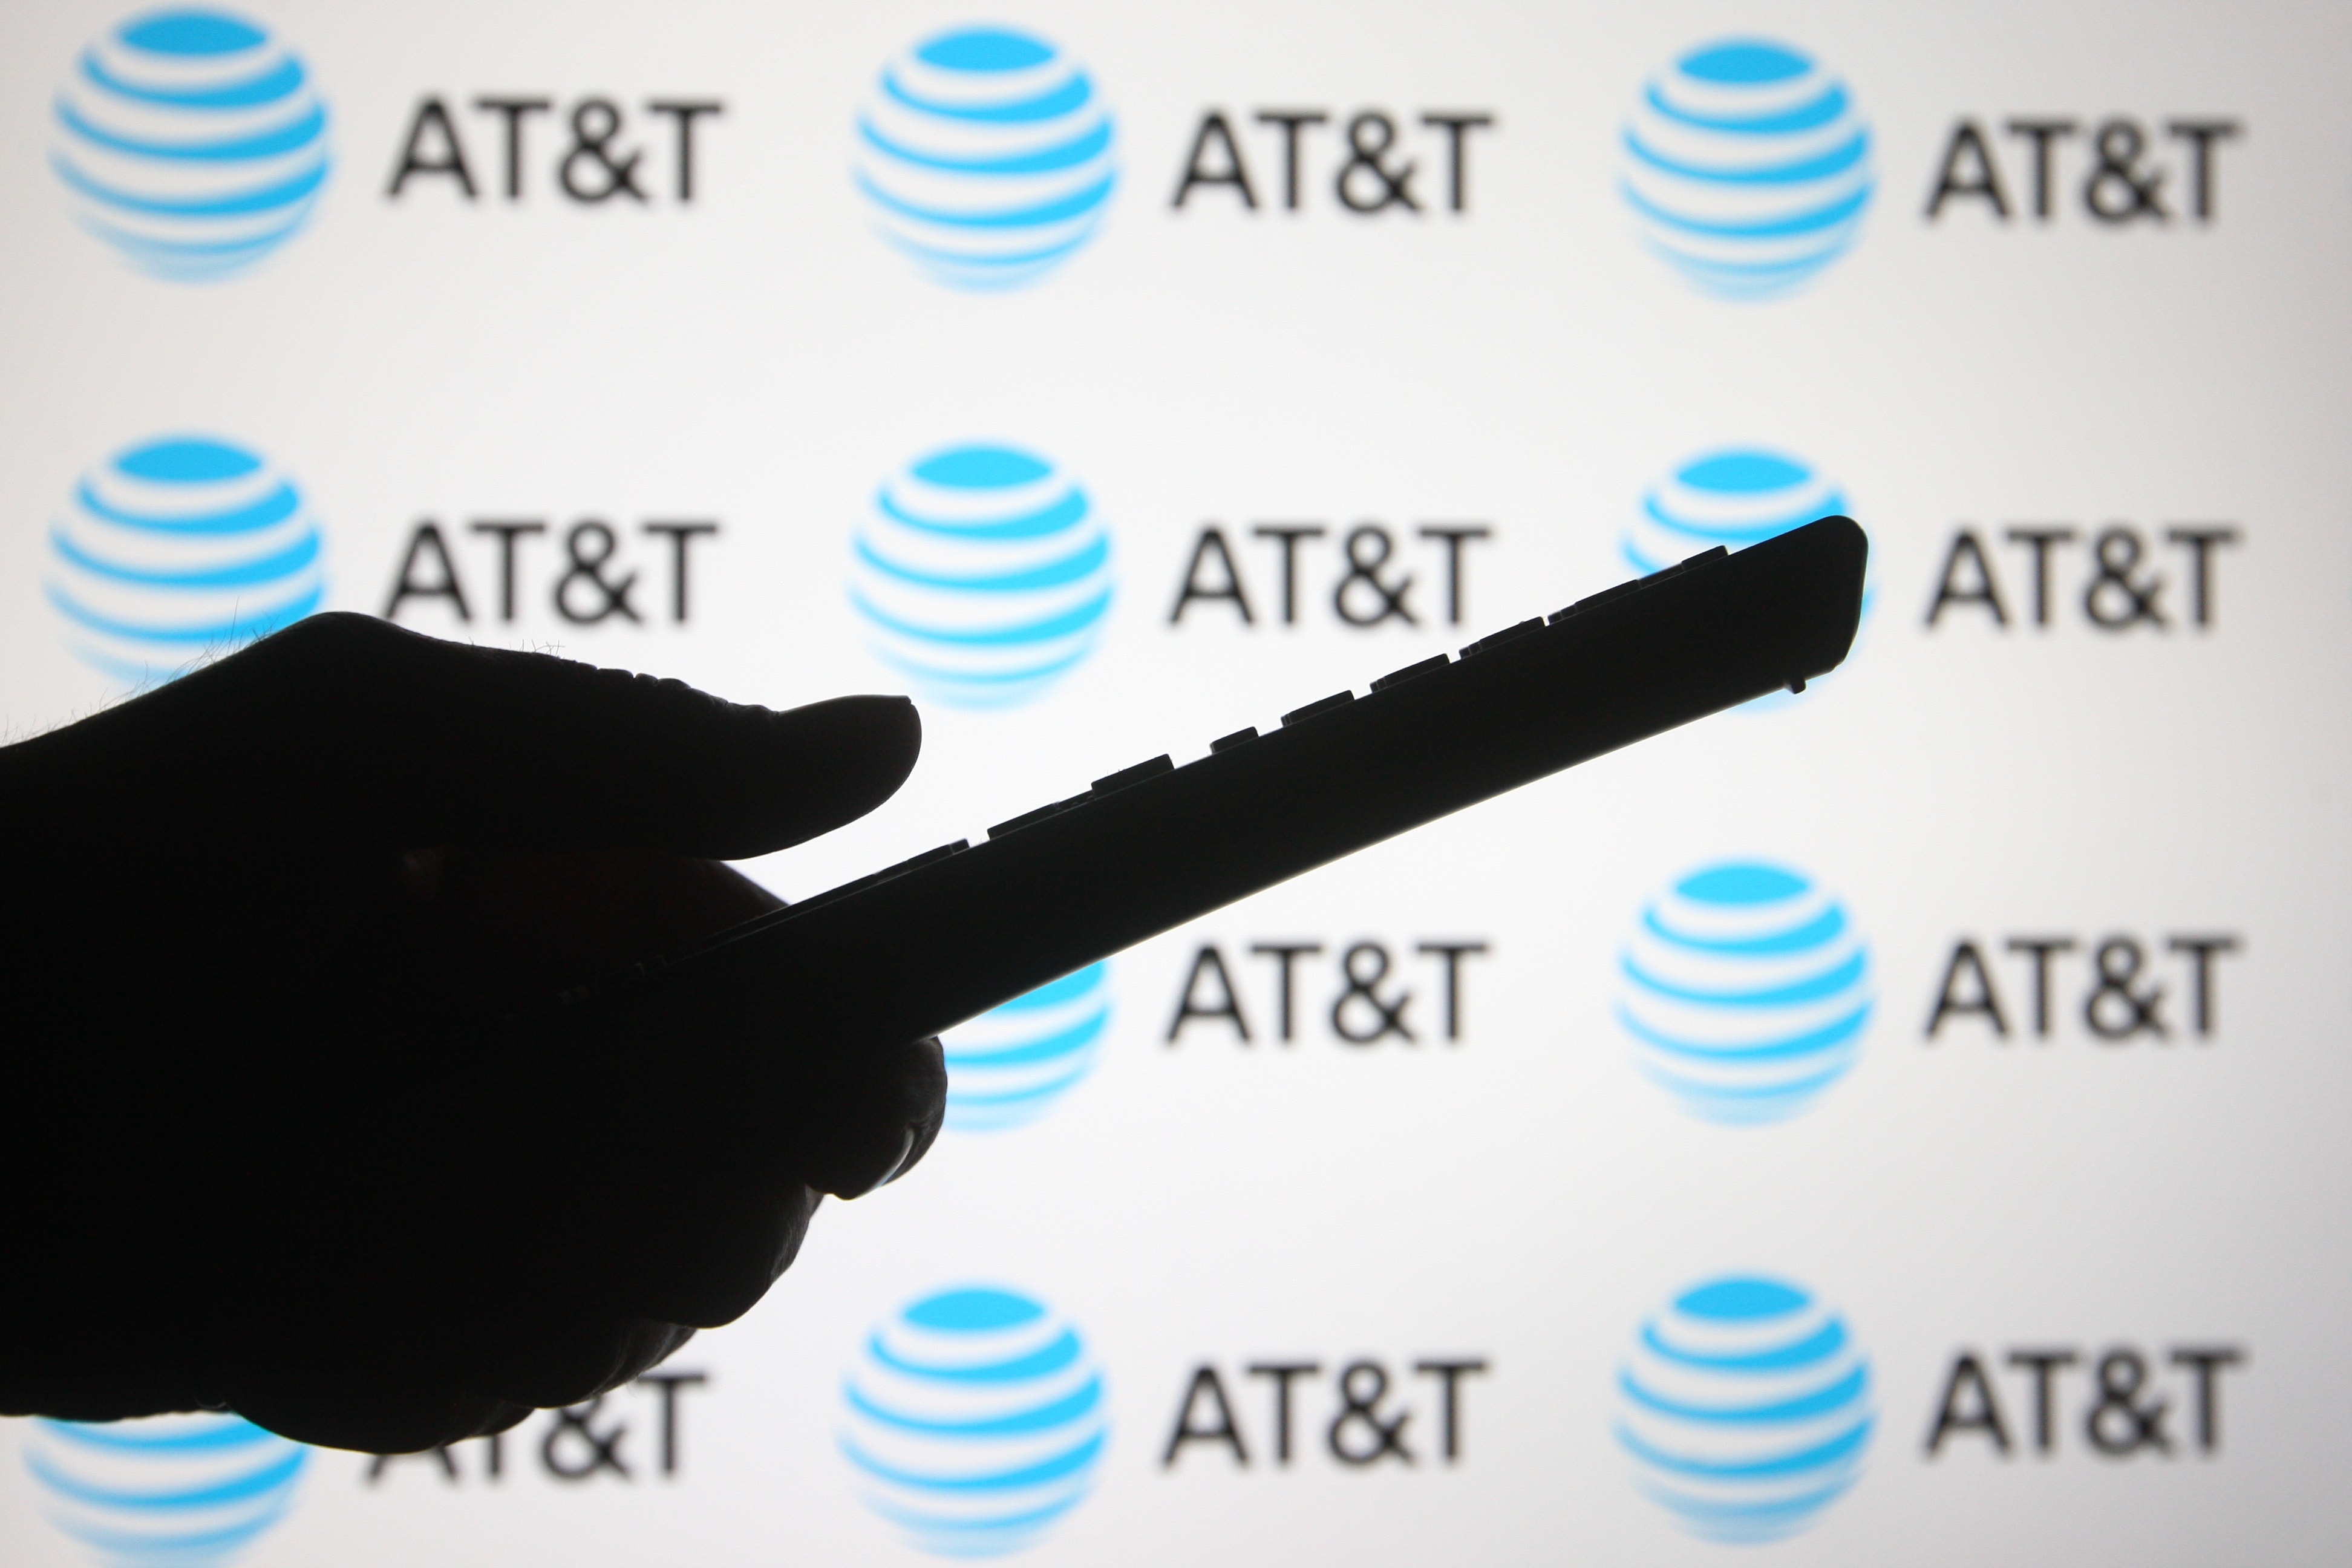 AT&T Stock Surges After Q3 Print: What To Watch With Verizon Earnings Coming Friday